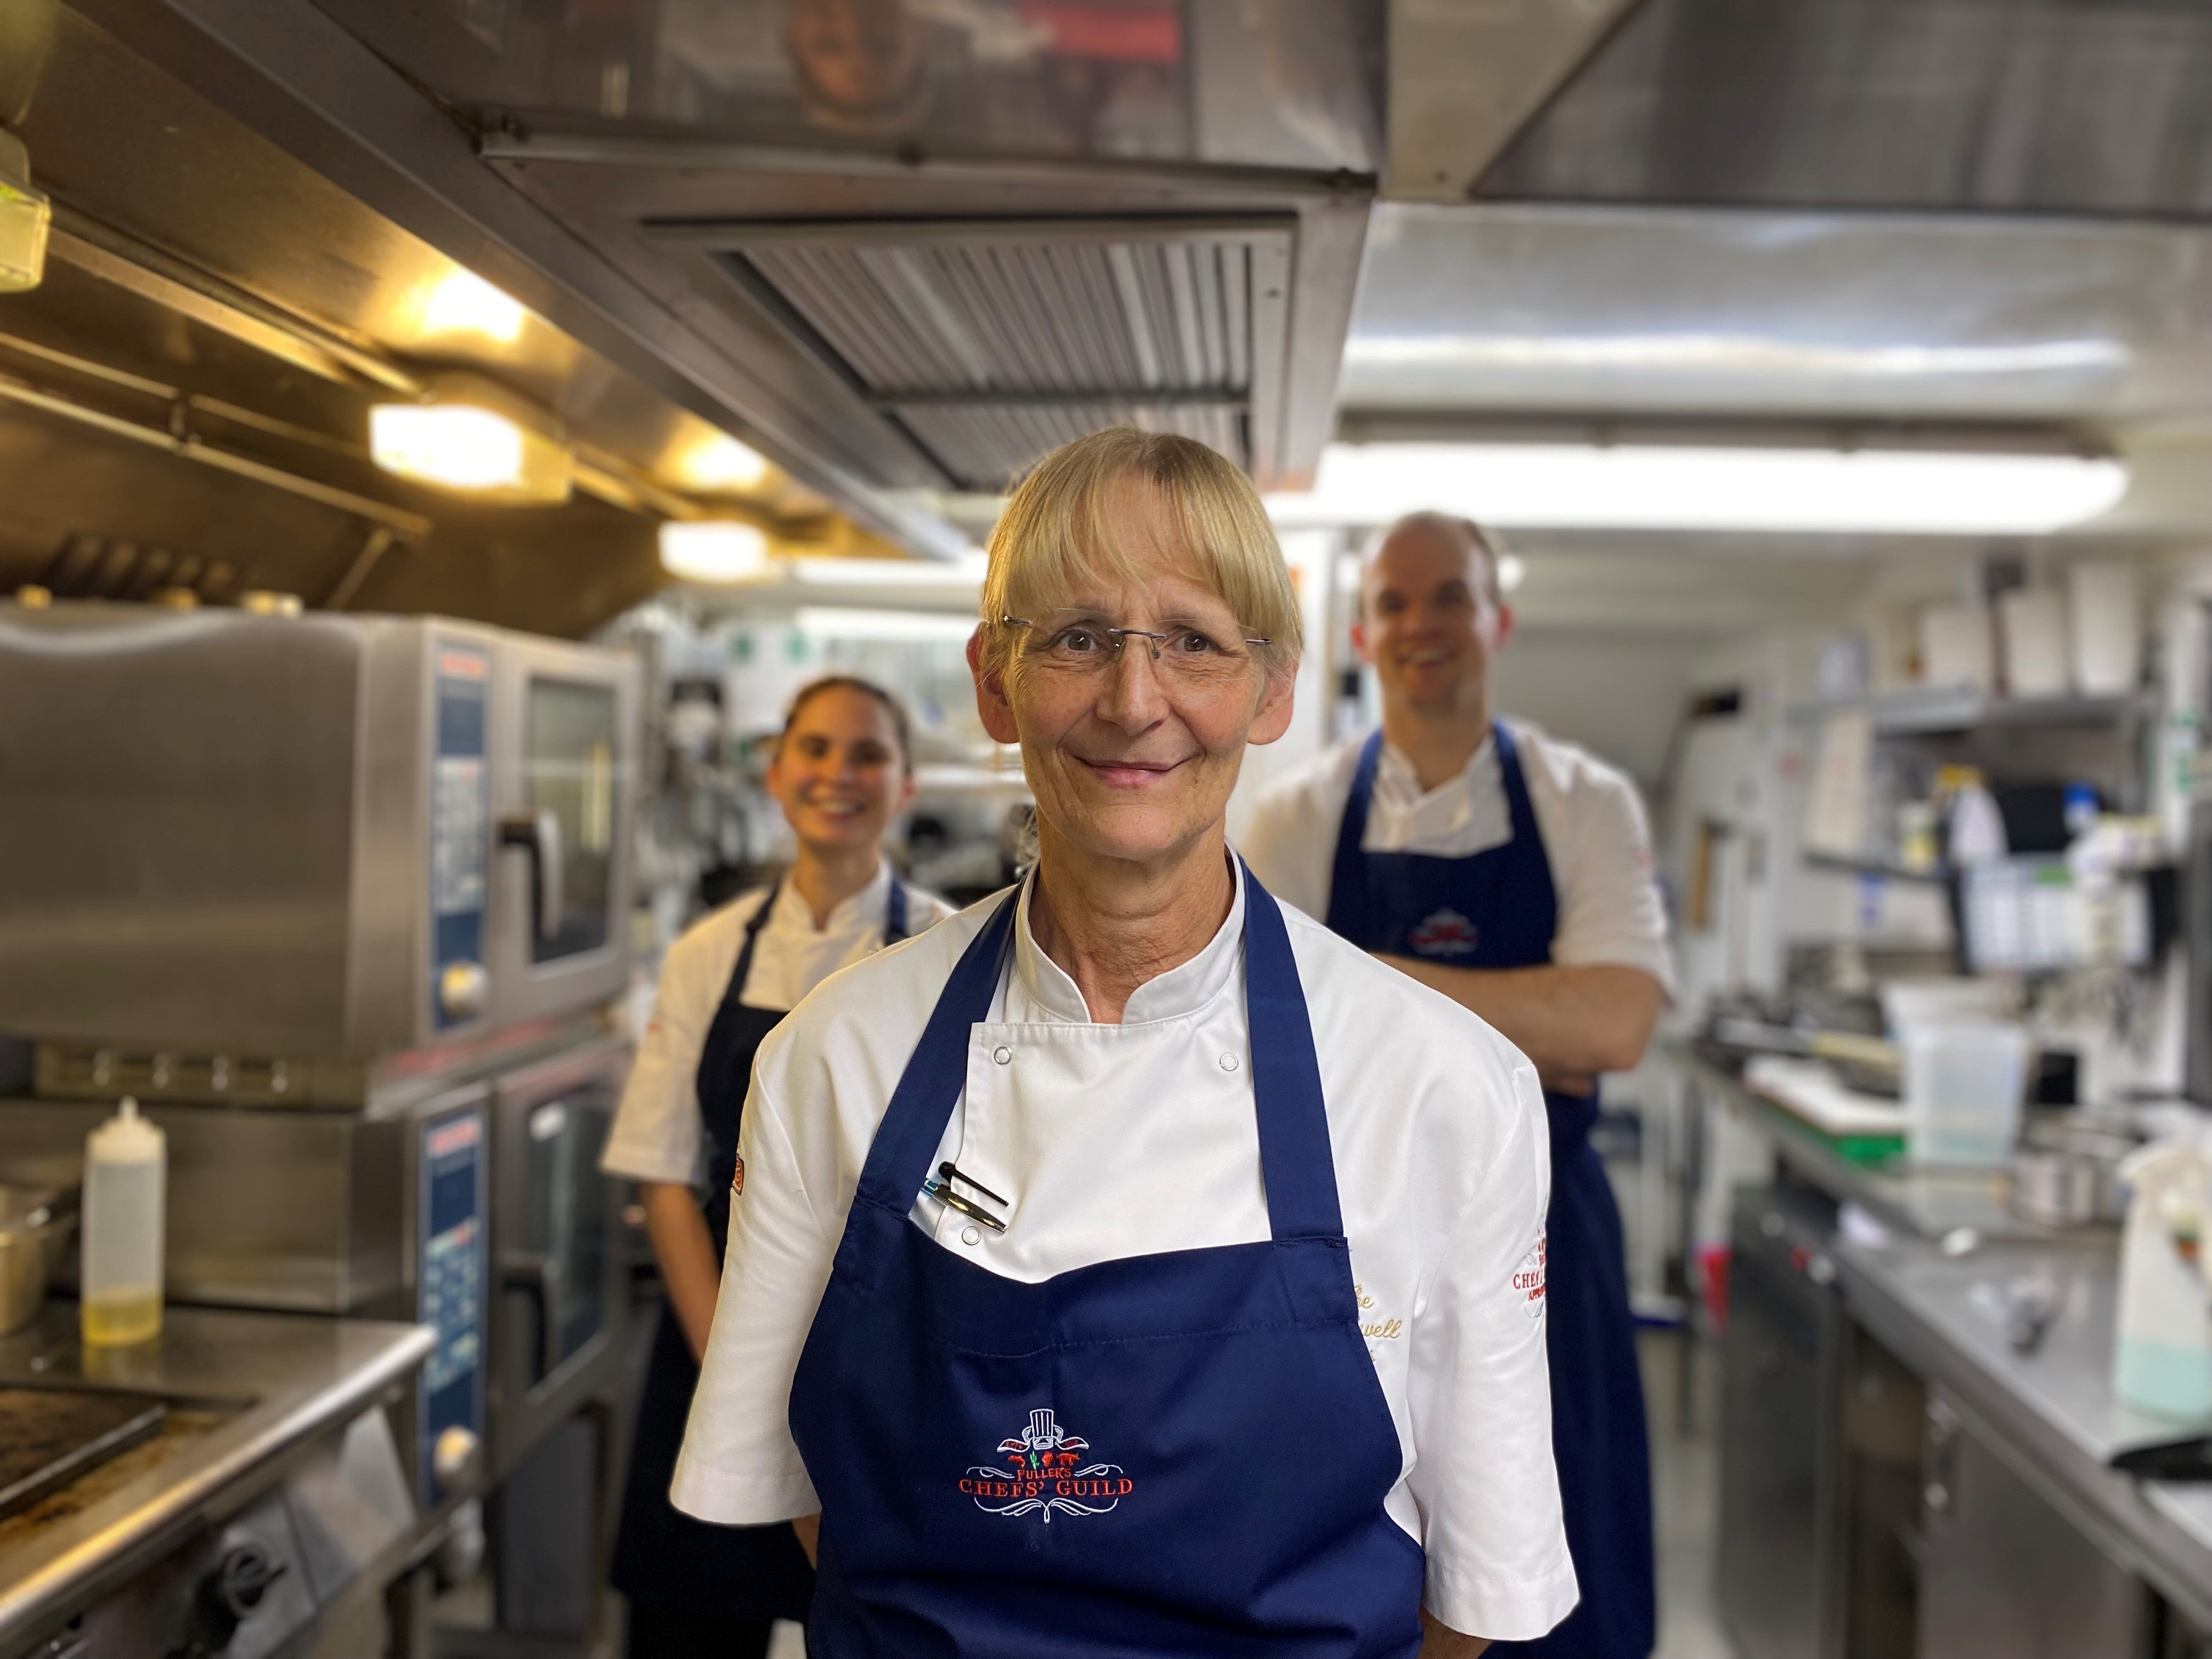 Claire Neale, 58, recently started a new role as a commis chef apprentice at Fuller’s pub the Cromwell Arms in Romsey, Hampshire